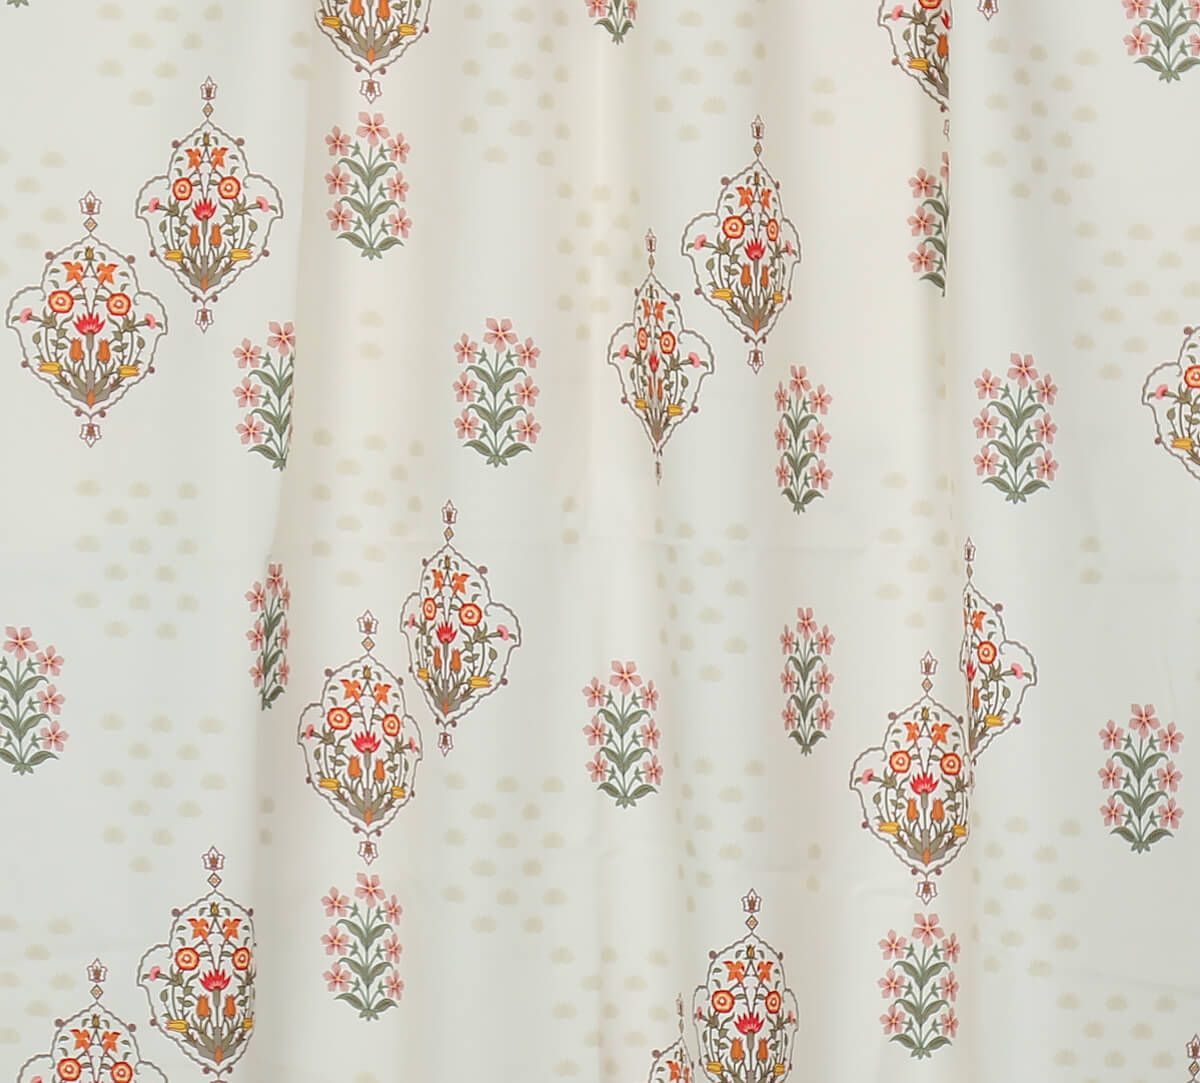 India Circus by Krsnaa Mehta Cosmic Latte Floret Delight Fabric